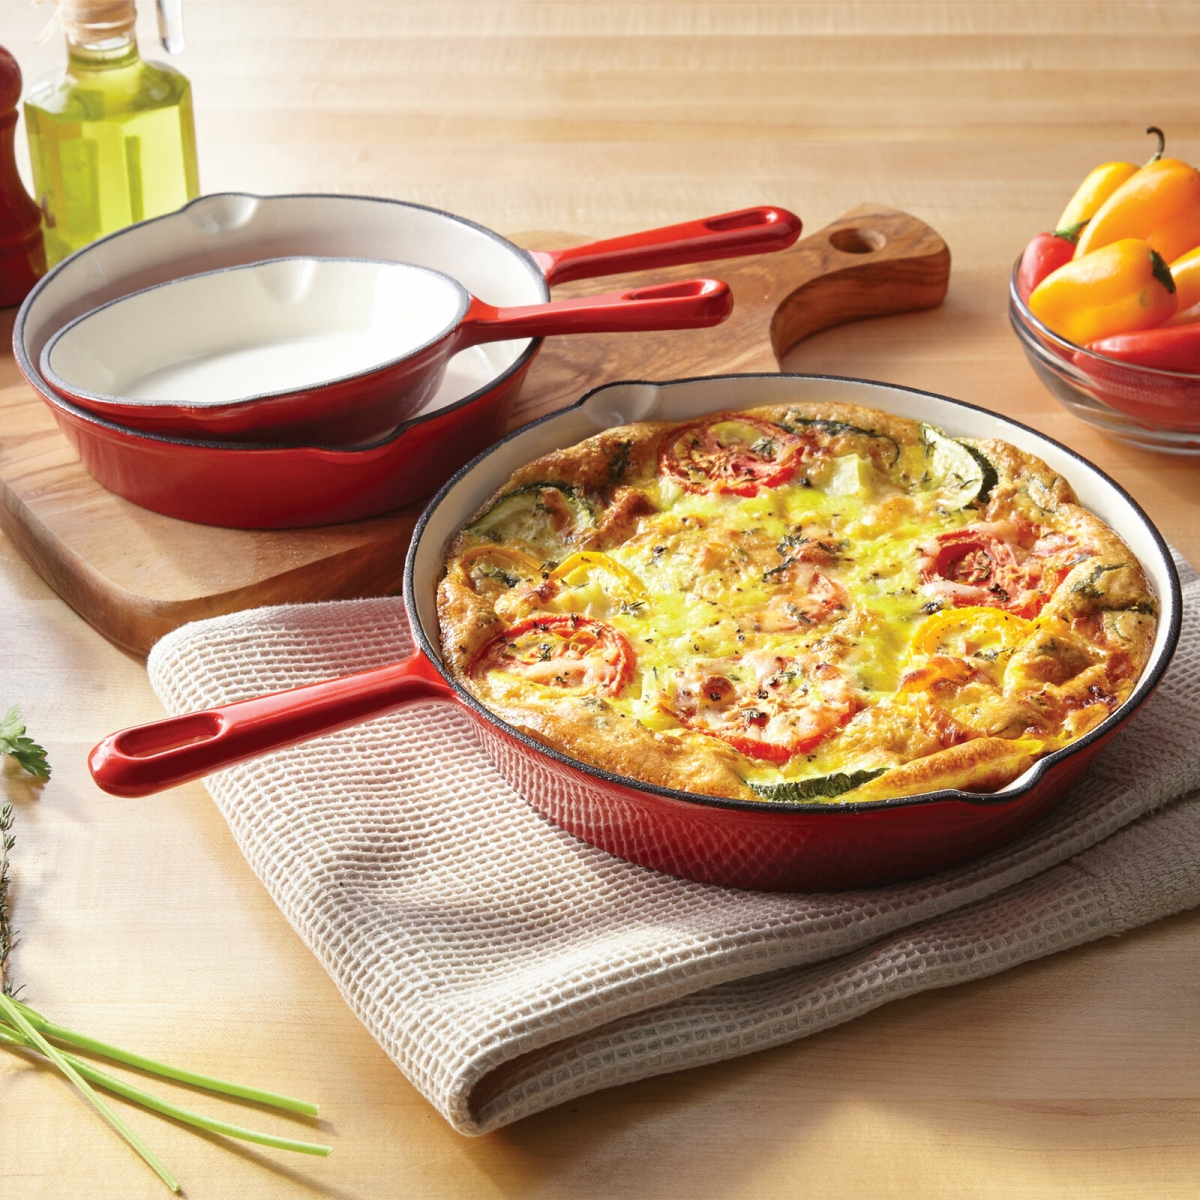 Picture of Cookpro 447 Cast Iron Enameled Skillet Cookware Set, Red